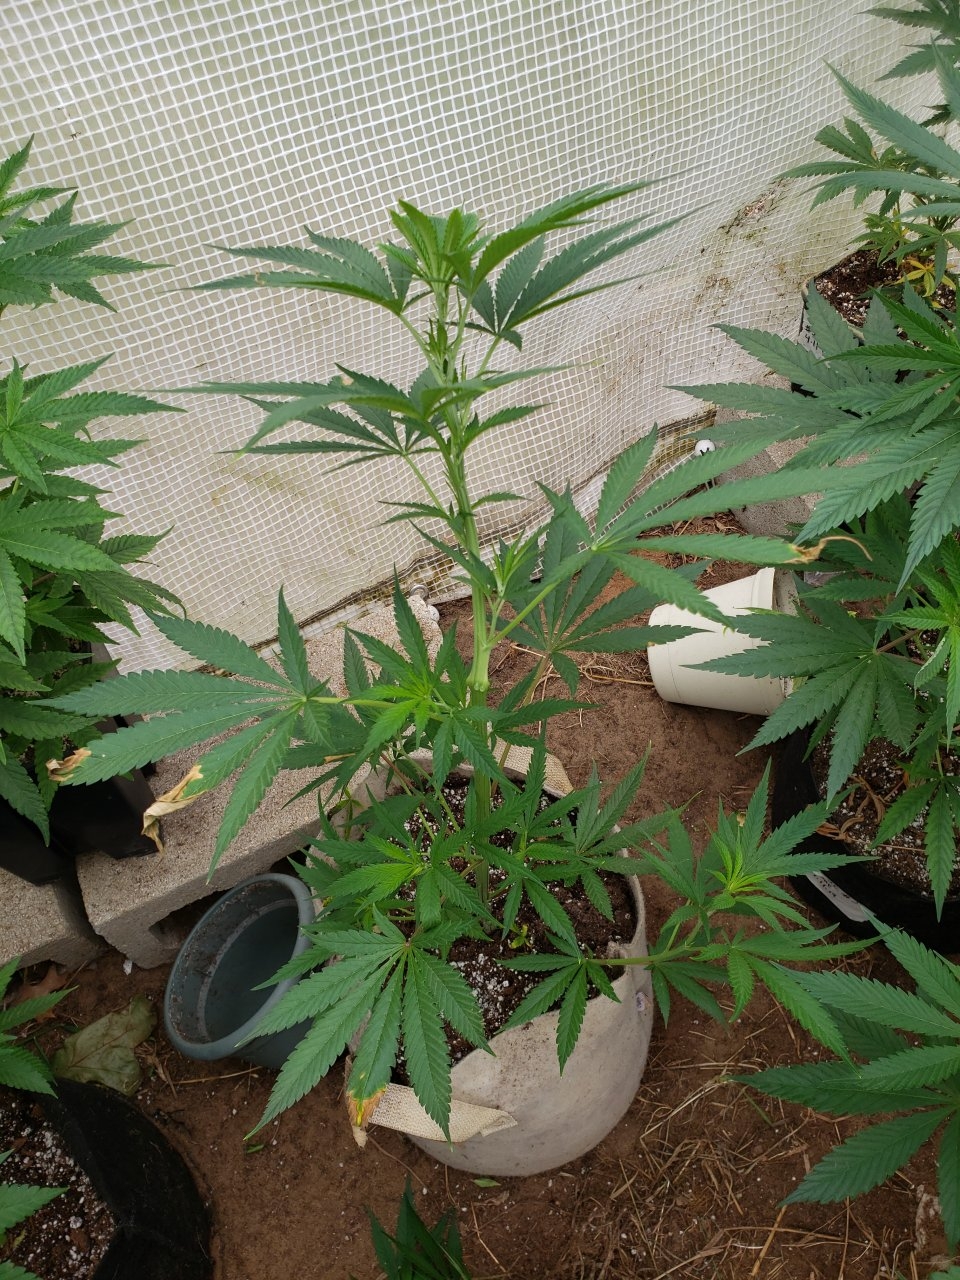 GSC clone outdoor still waiting to show sex